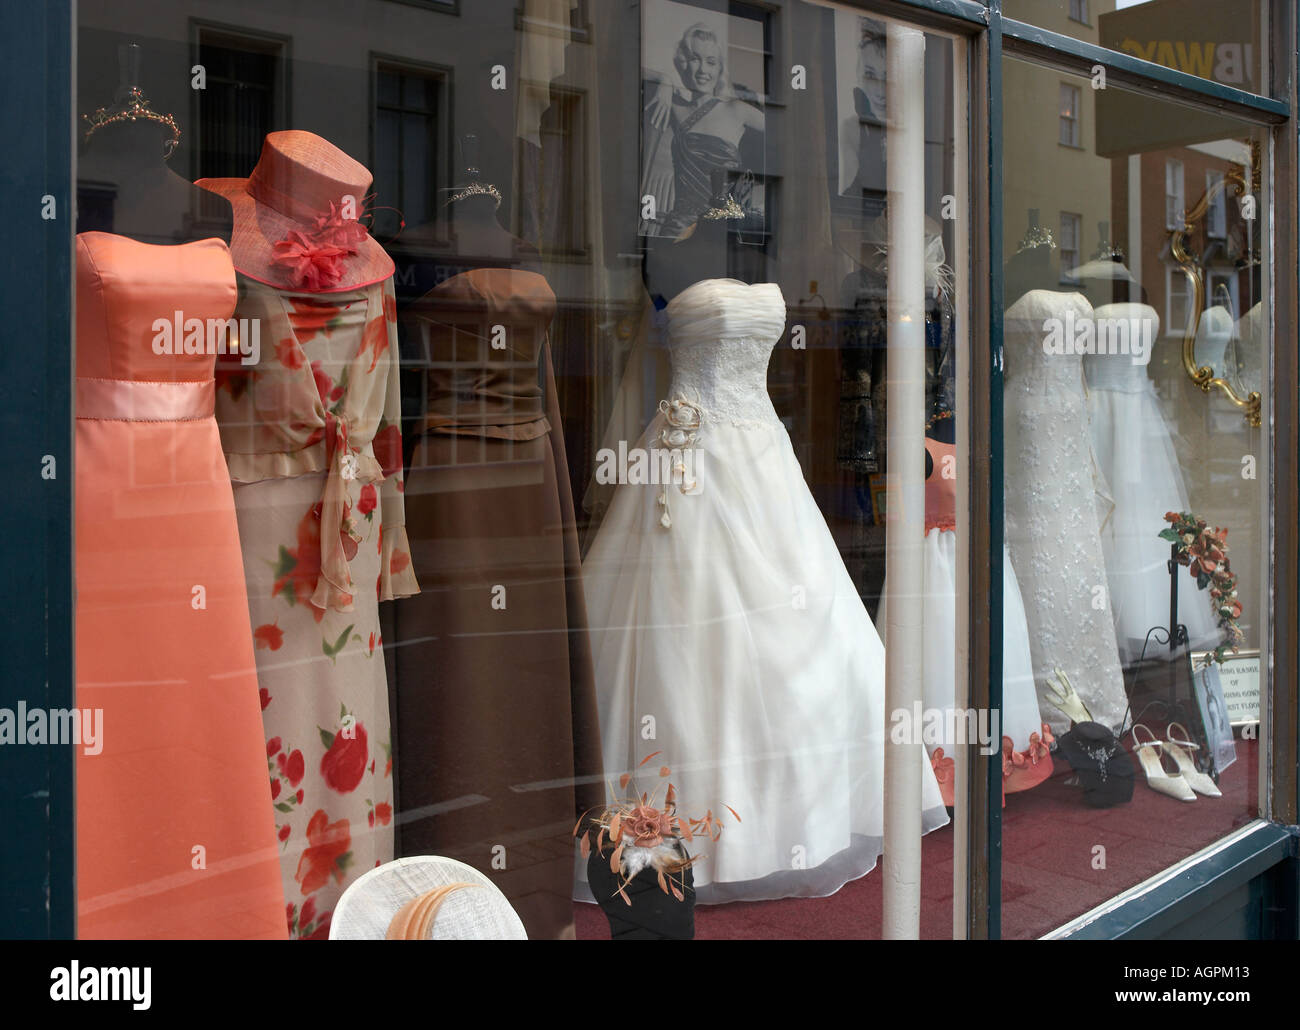 BRIDAL GOWN ON MANNEQUIN IN SHOP WINDOW DISPLAY Stock Photo